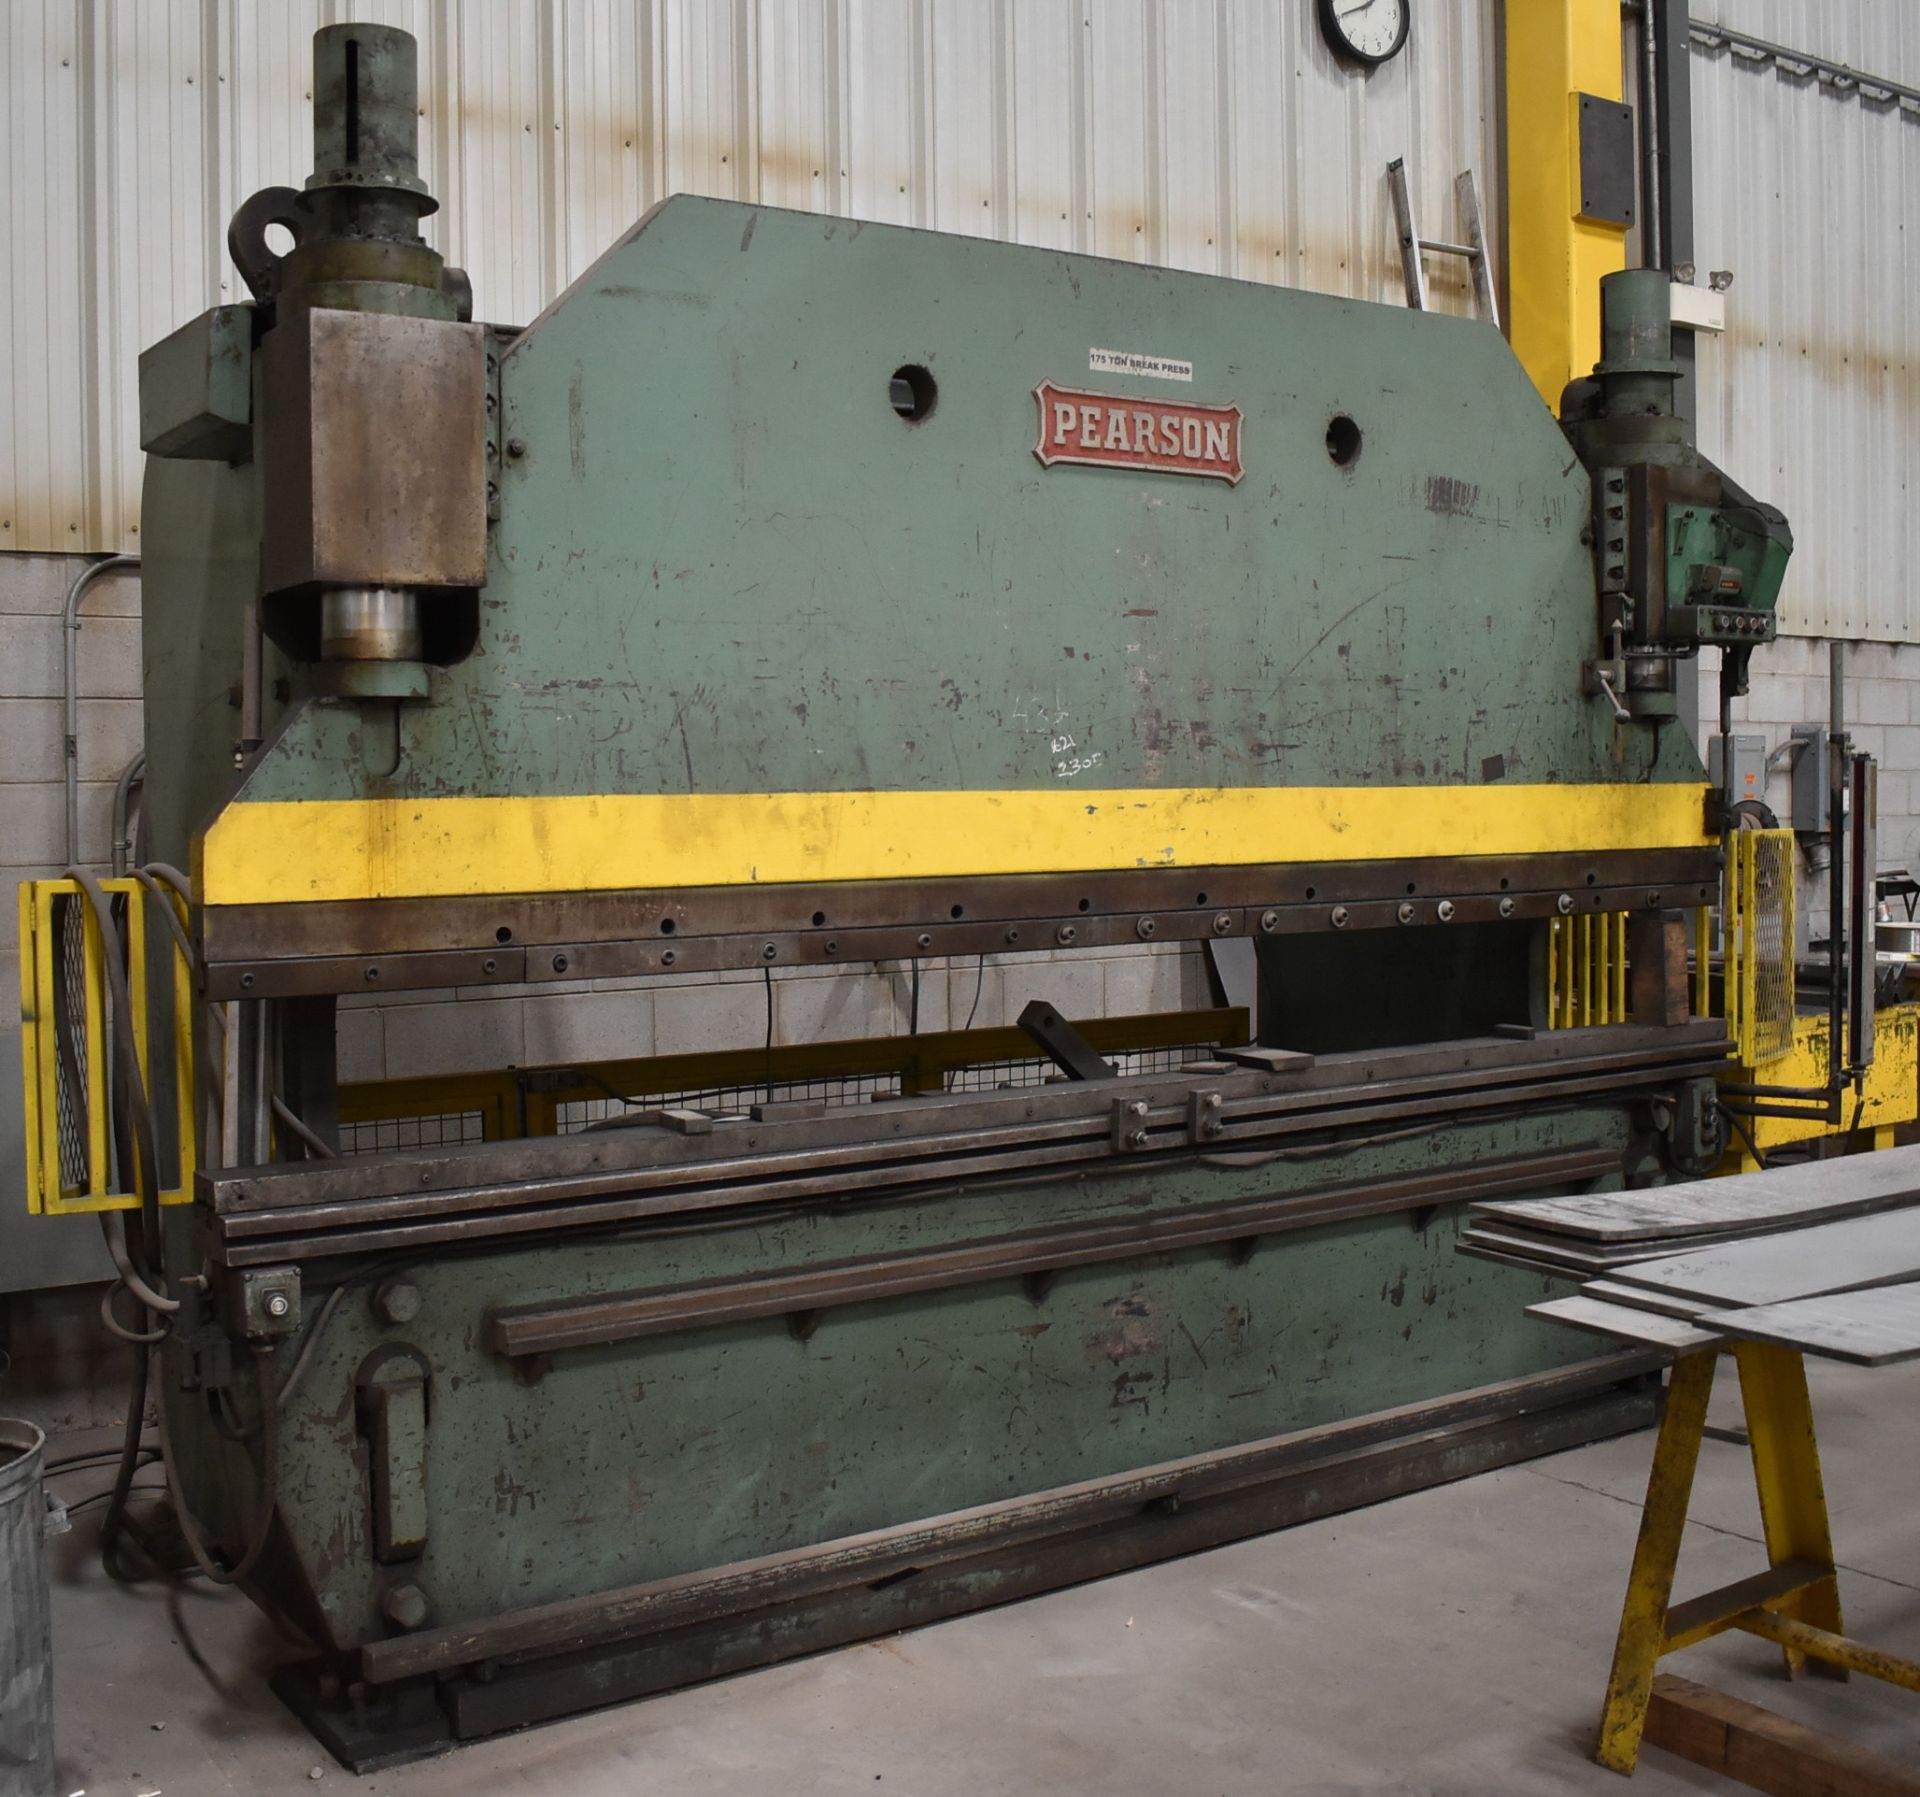 PEARSON HYDRAULIC BRAKE PRESS WITH 175 TON CAPACITY, 147" OVERALL BENDING LENGTH, 122" BETWEEN